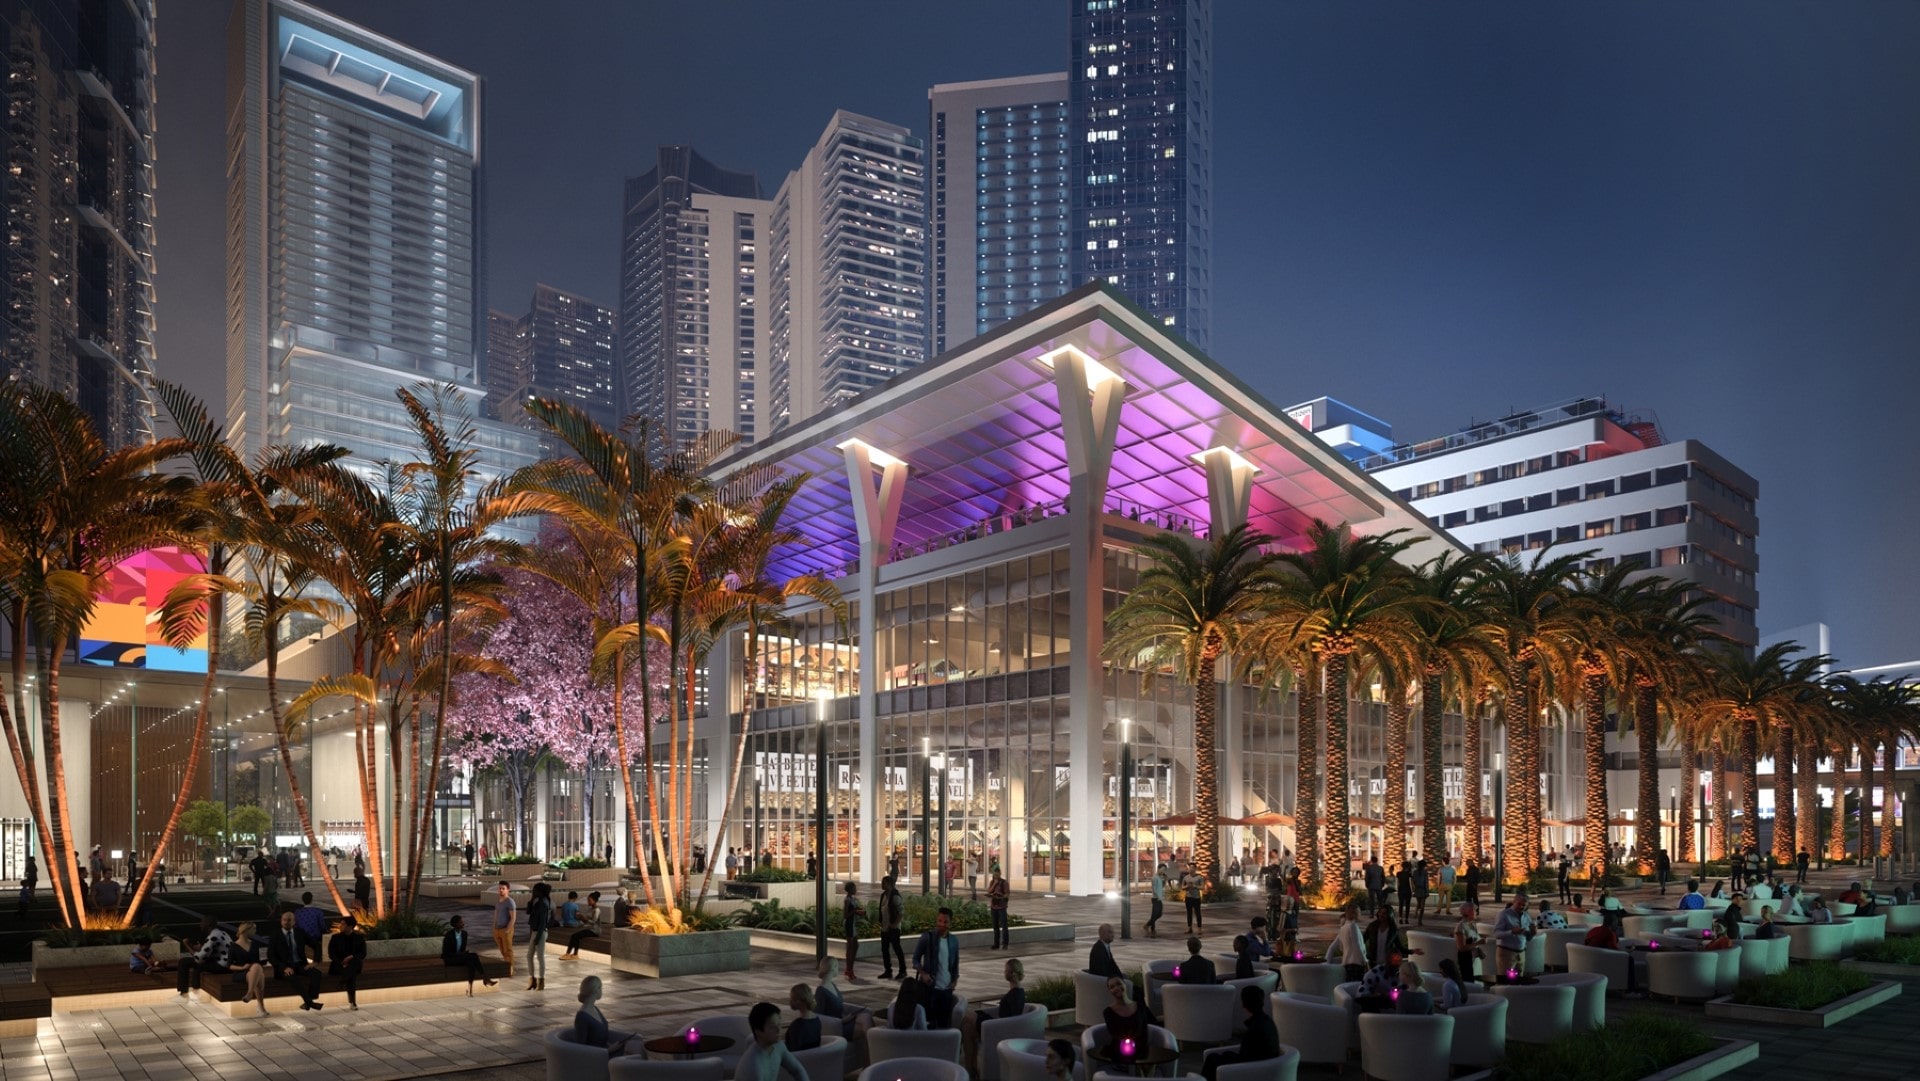 Miami Worldcenter Block-F. Designed by NBWW Architects.